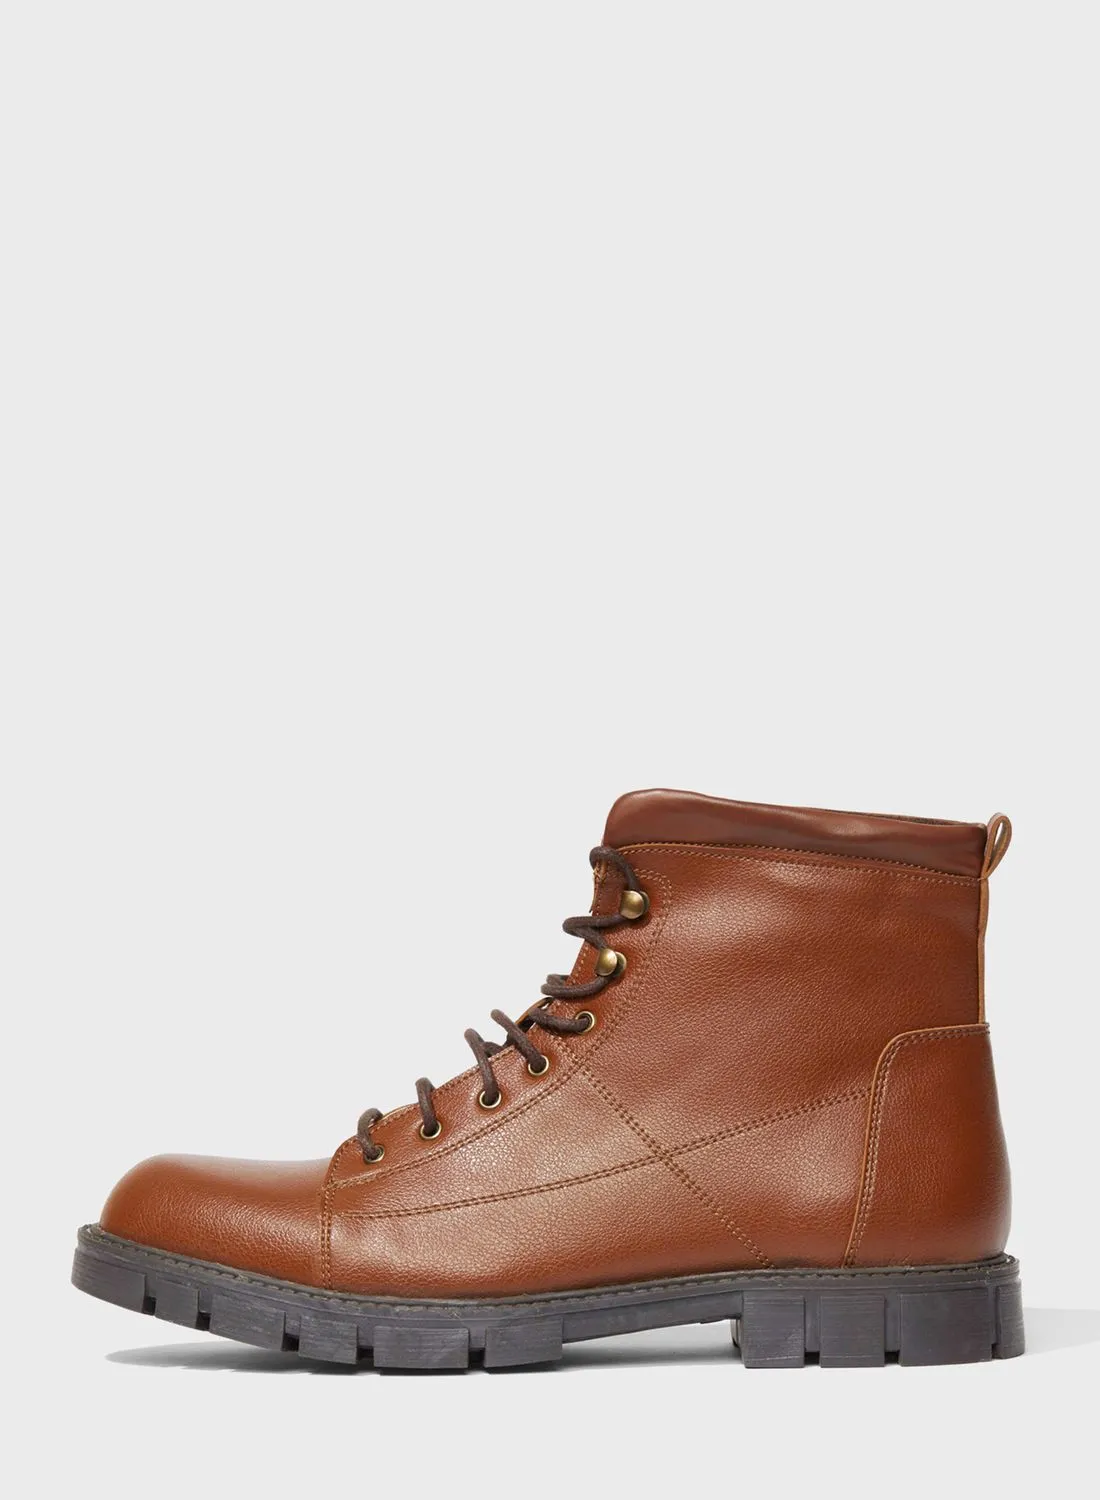 DeFacto Lace Up High Top Formal Boots